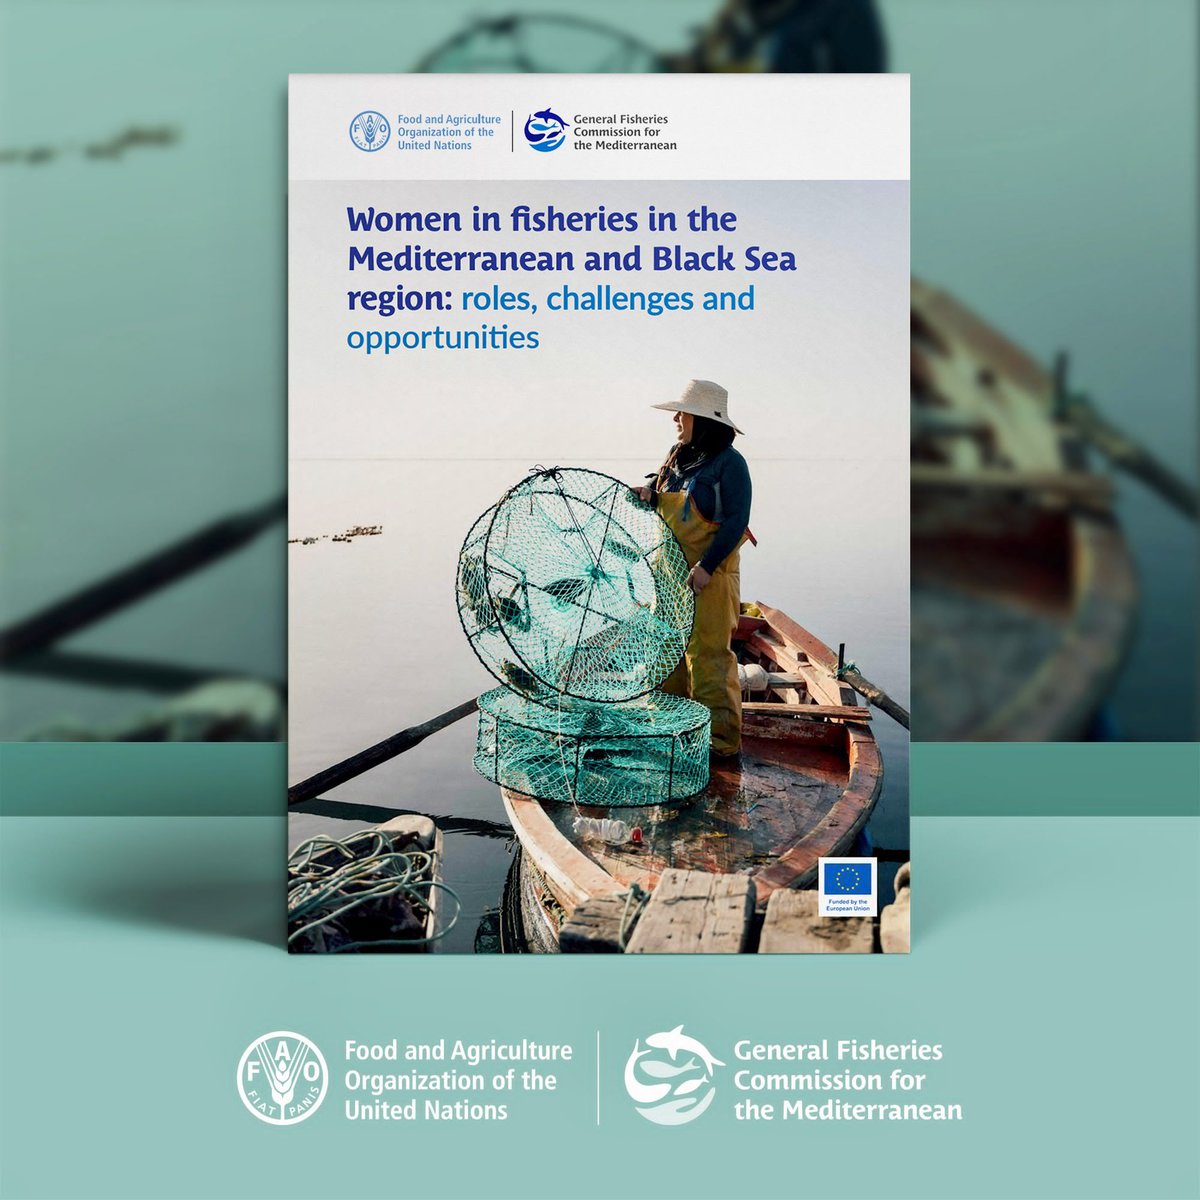 Let's learn more on #WomenInFisheries!🎣 🇬🇪 Black Sea Young Ambassador @marikamakharad1, one of the interviewees representing #women in #fisheries, contributed to the latest @UN_FAO_GFCM publication, placing gender equity in fisheries at the forefront. 📚fao.org/documents/card…